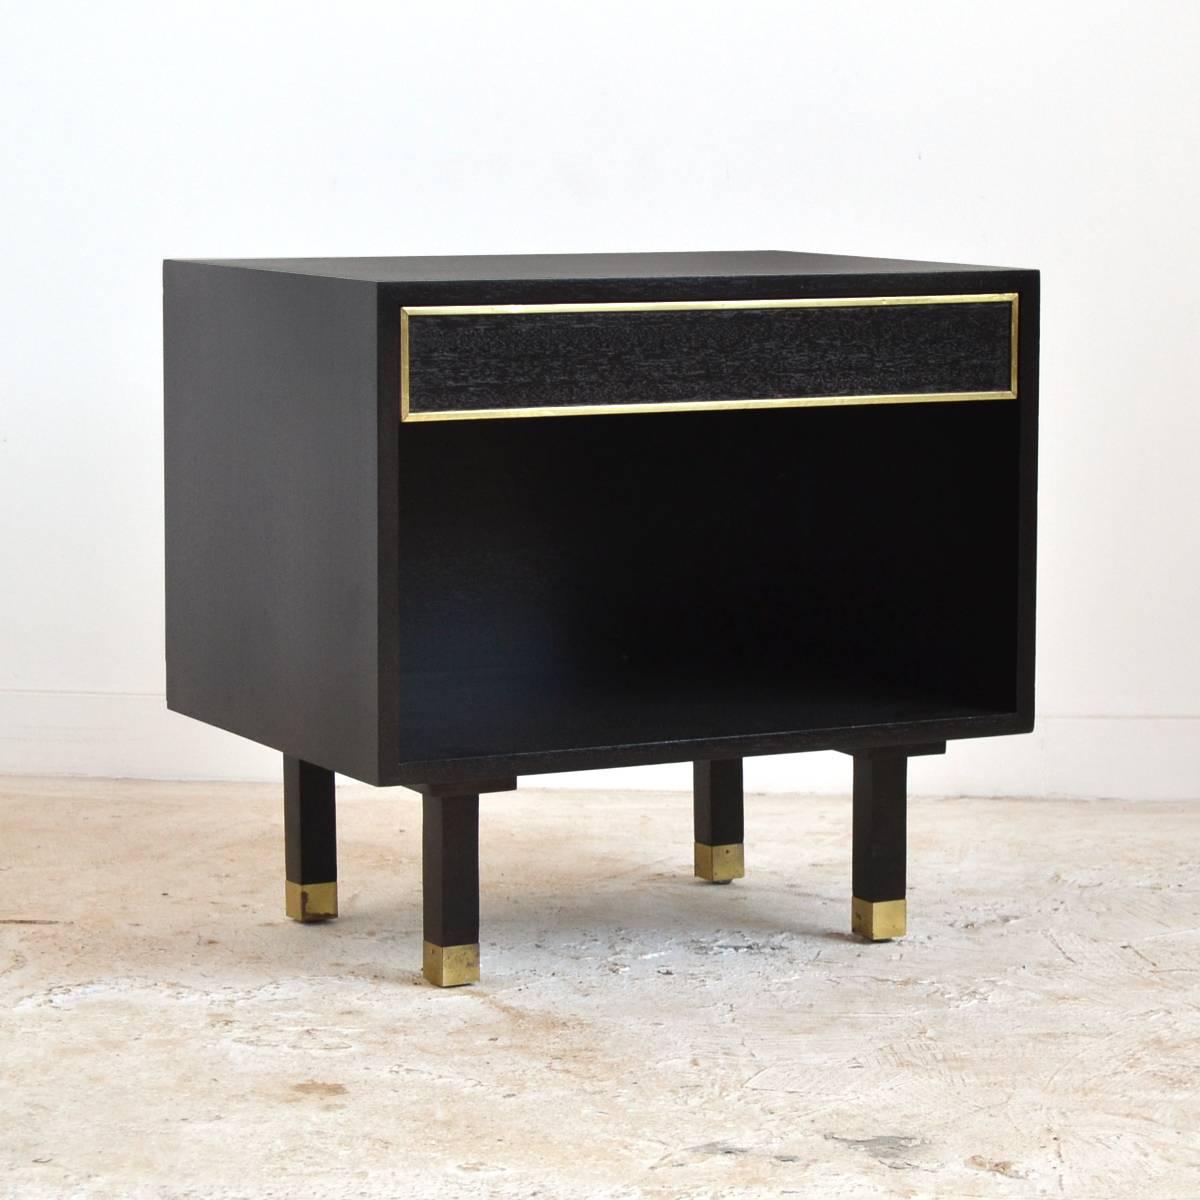 A lovely little end table or nightstand in mahogany with a rich, dark finish and brass details. It features a single shallow drawer over an open cabinet.